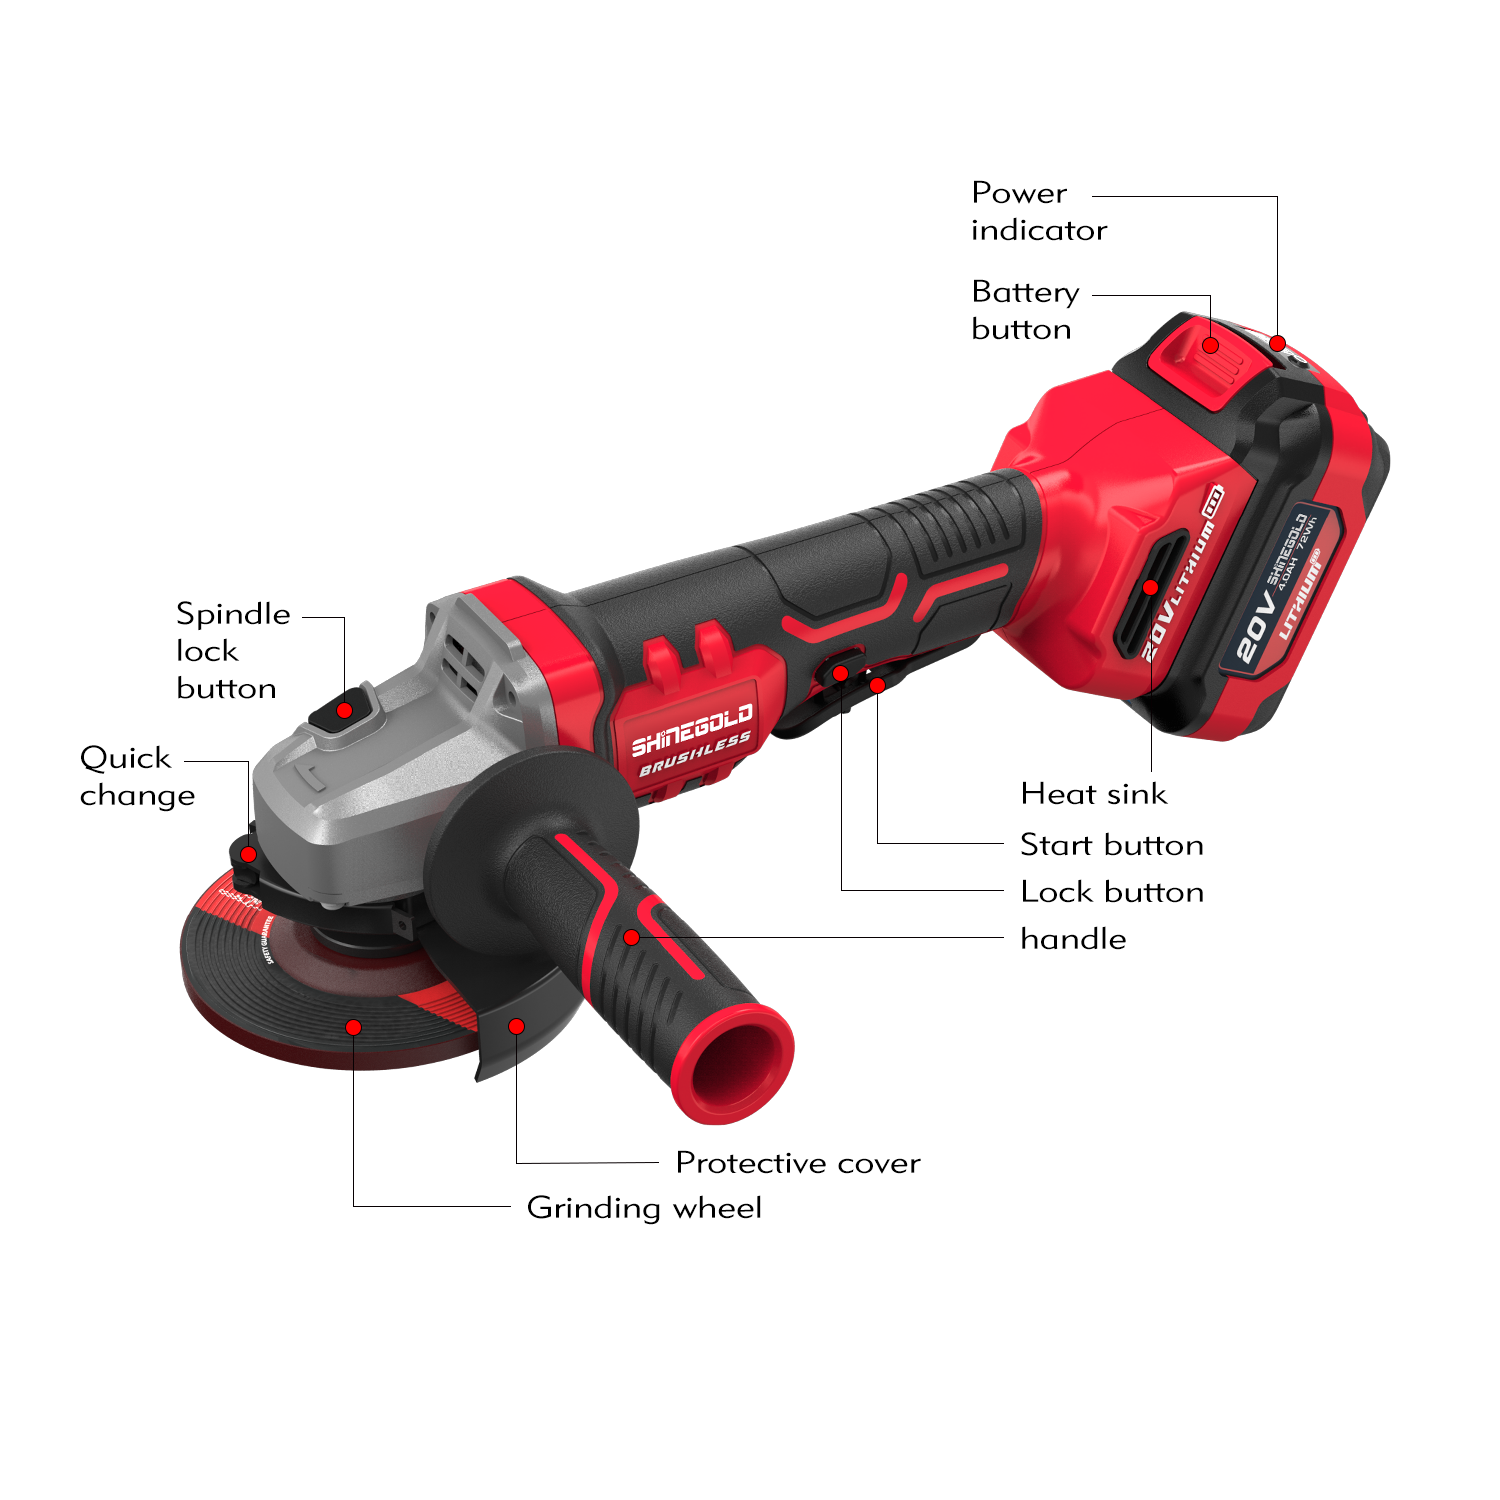 Grossista OEM 20v Cordless Power Tools Electric Portable 115mm Brushless Angle Grinder